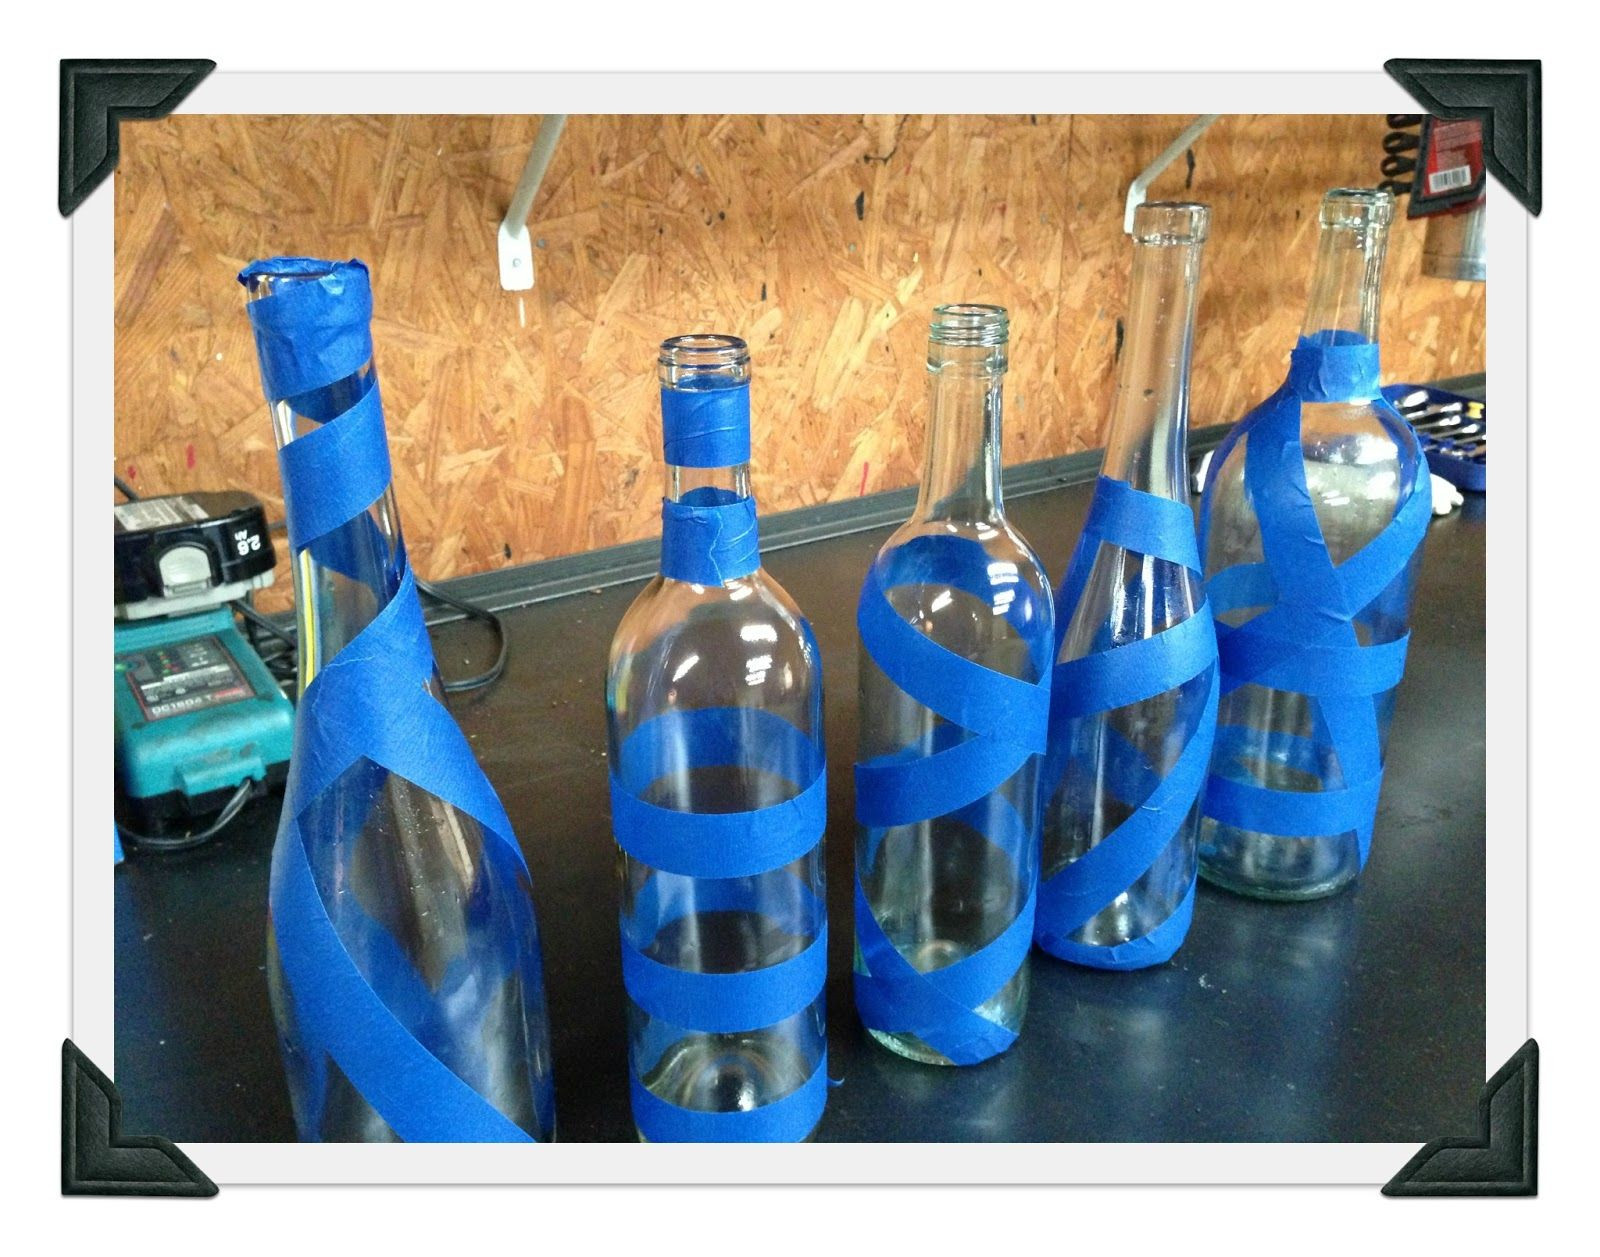 28 Spectacular Wine Bottle Vase 2024 free download wine bottle vase of spray painted wine bottles wine bottle to prevent spray paint with regard to spray painted wine bottles wine bottle to prevent spray paint from spraying